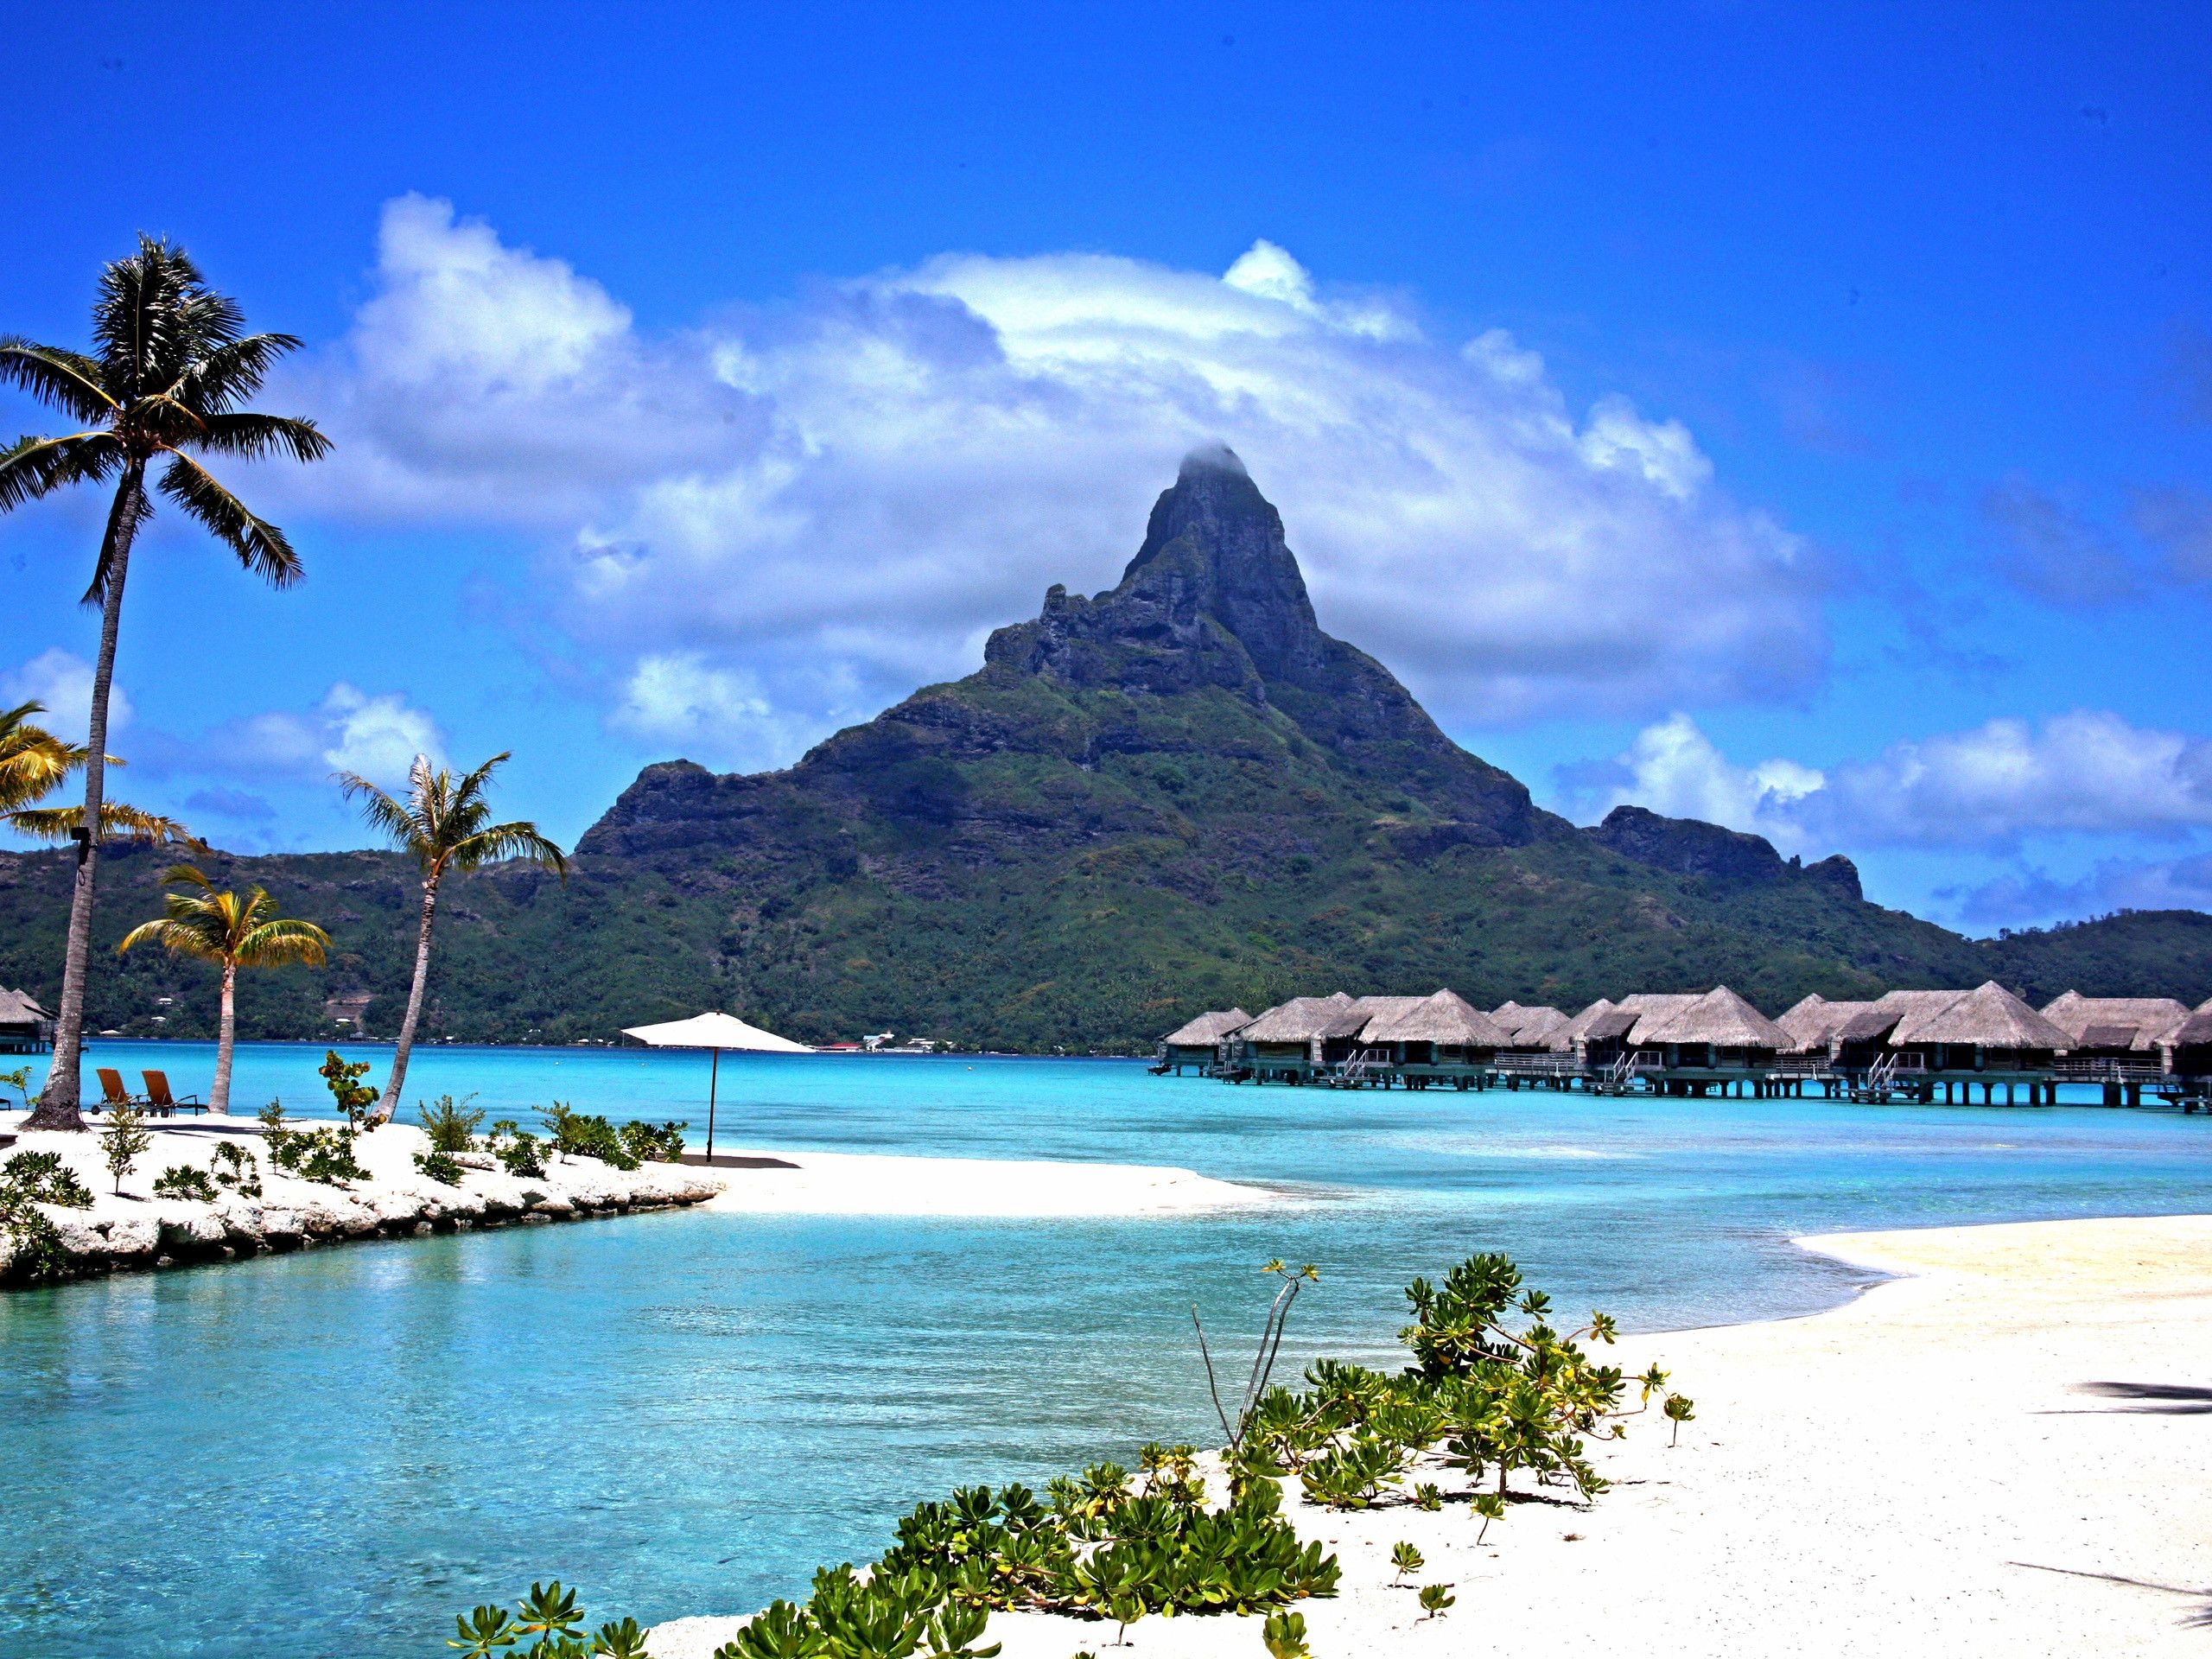 Bora Bora: In the center of the island are the remnants of an extinct volcano, rising to two peaks, Mount Pahia and Mount Otemanu. 2560x1920 HD Wallpaper.